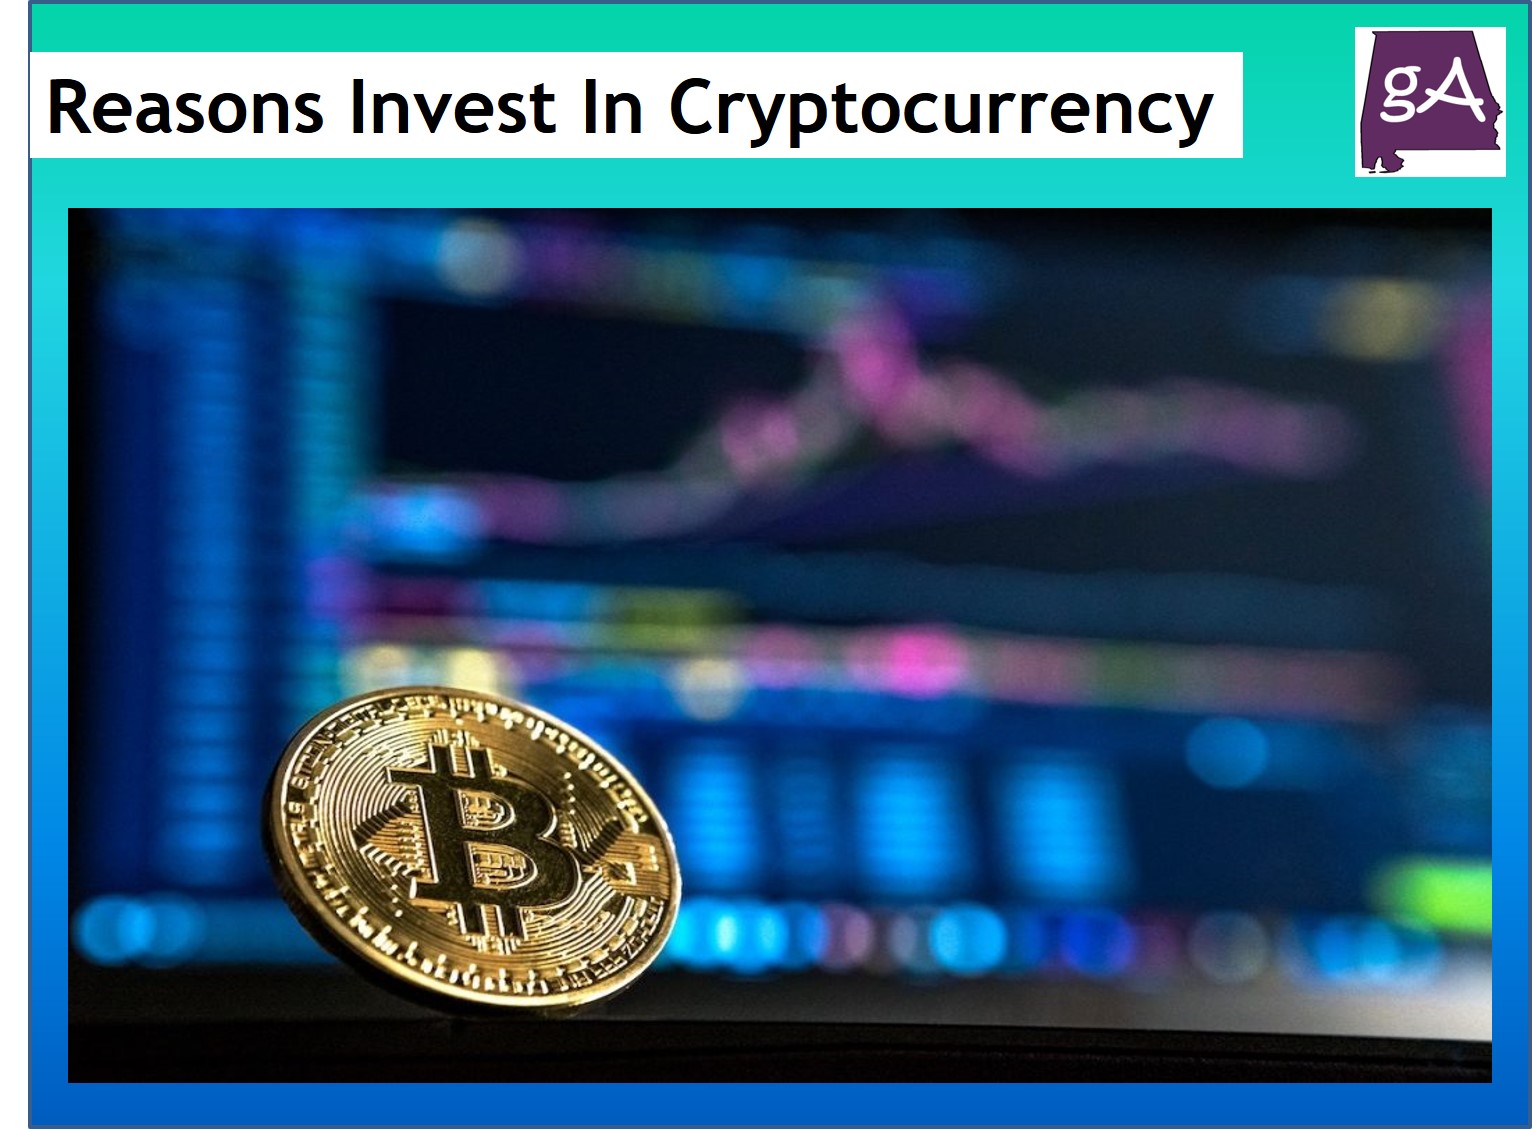 Reasons To Invest in Cryptocurrency